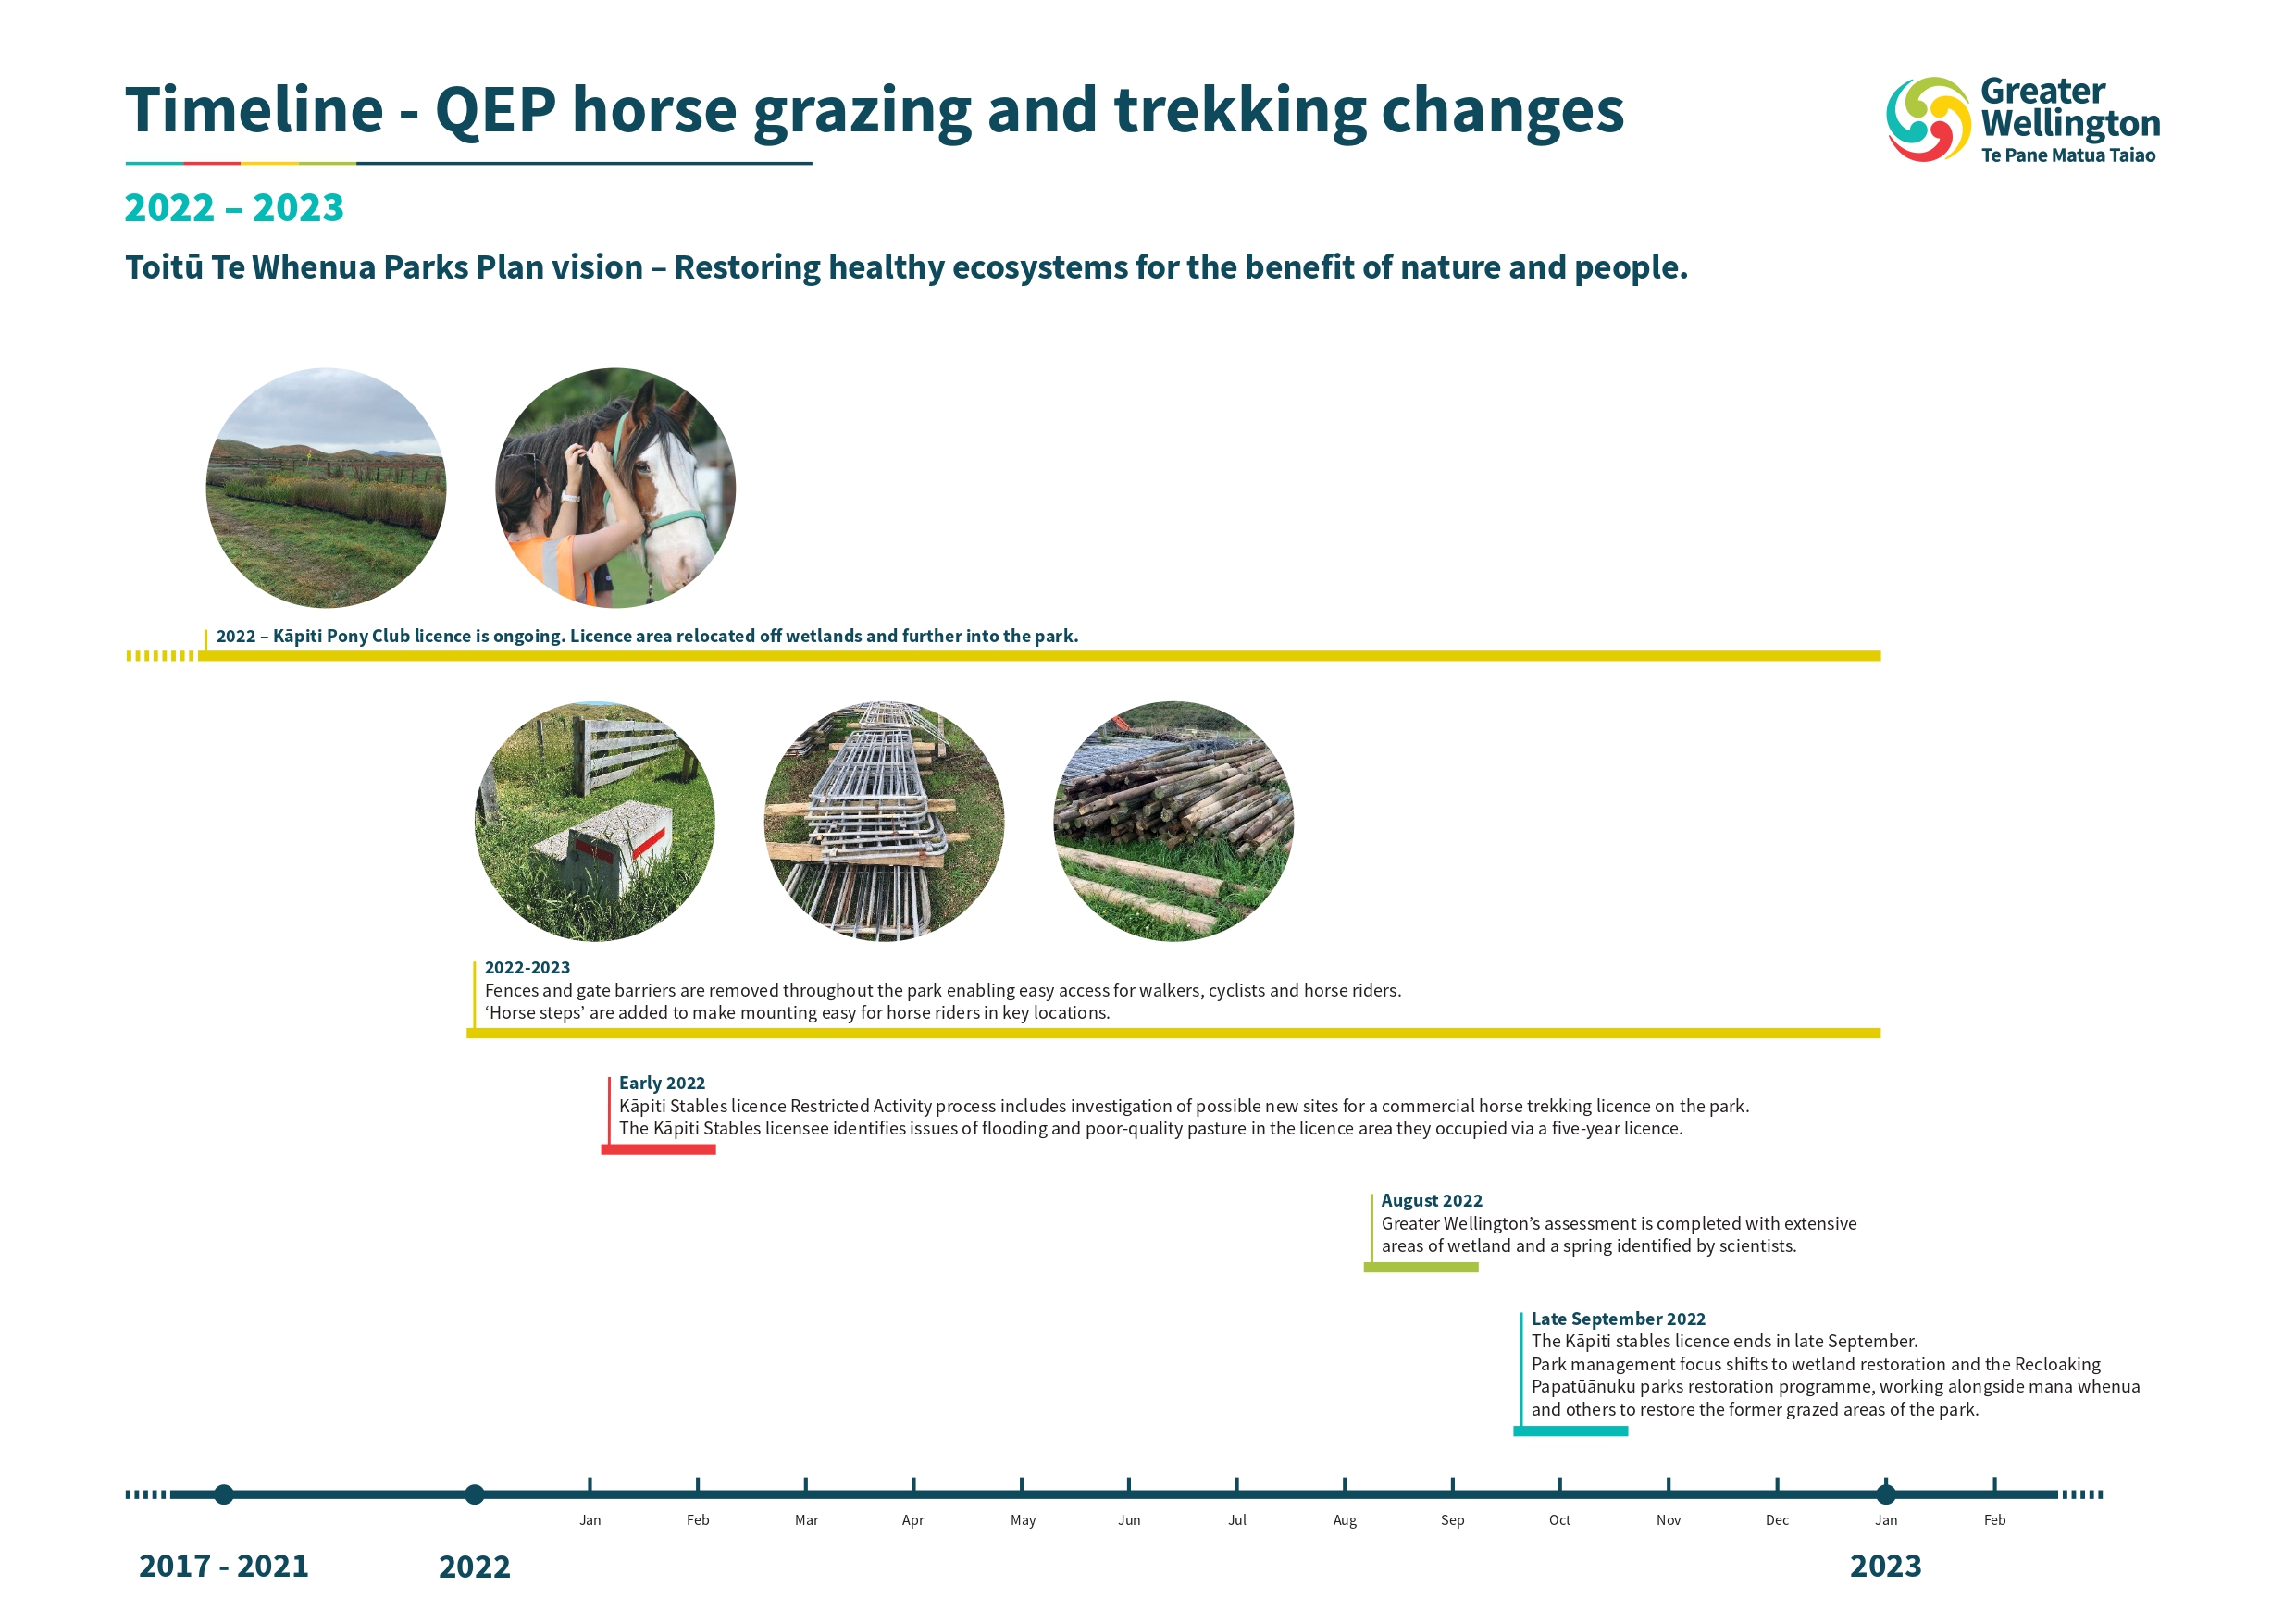 Timeline of QEP horse grazing and trekking changes from 2022 to 2023